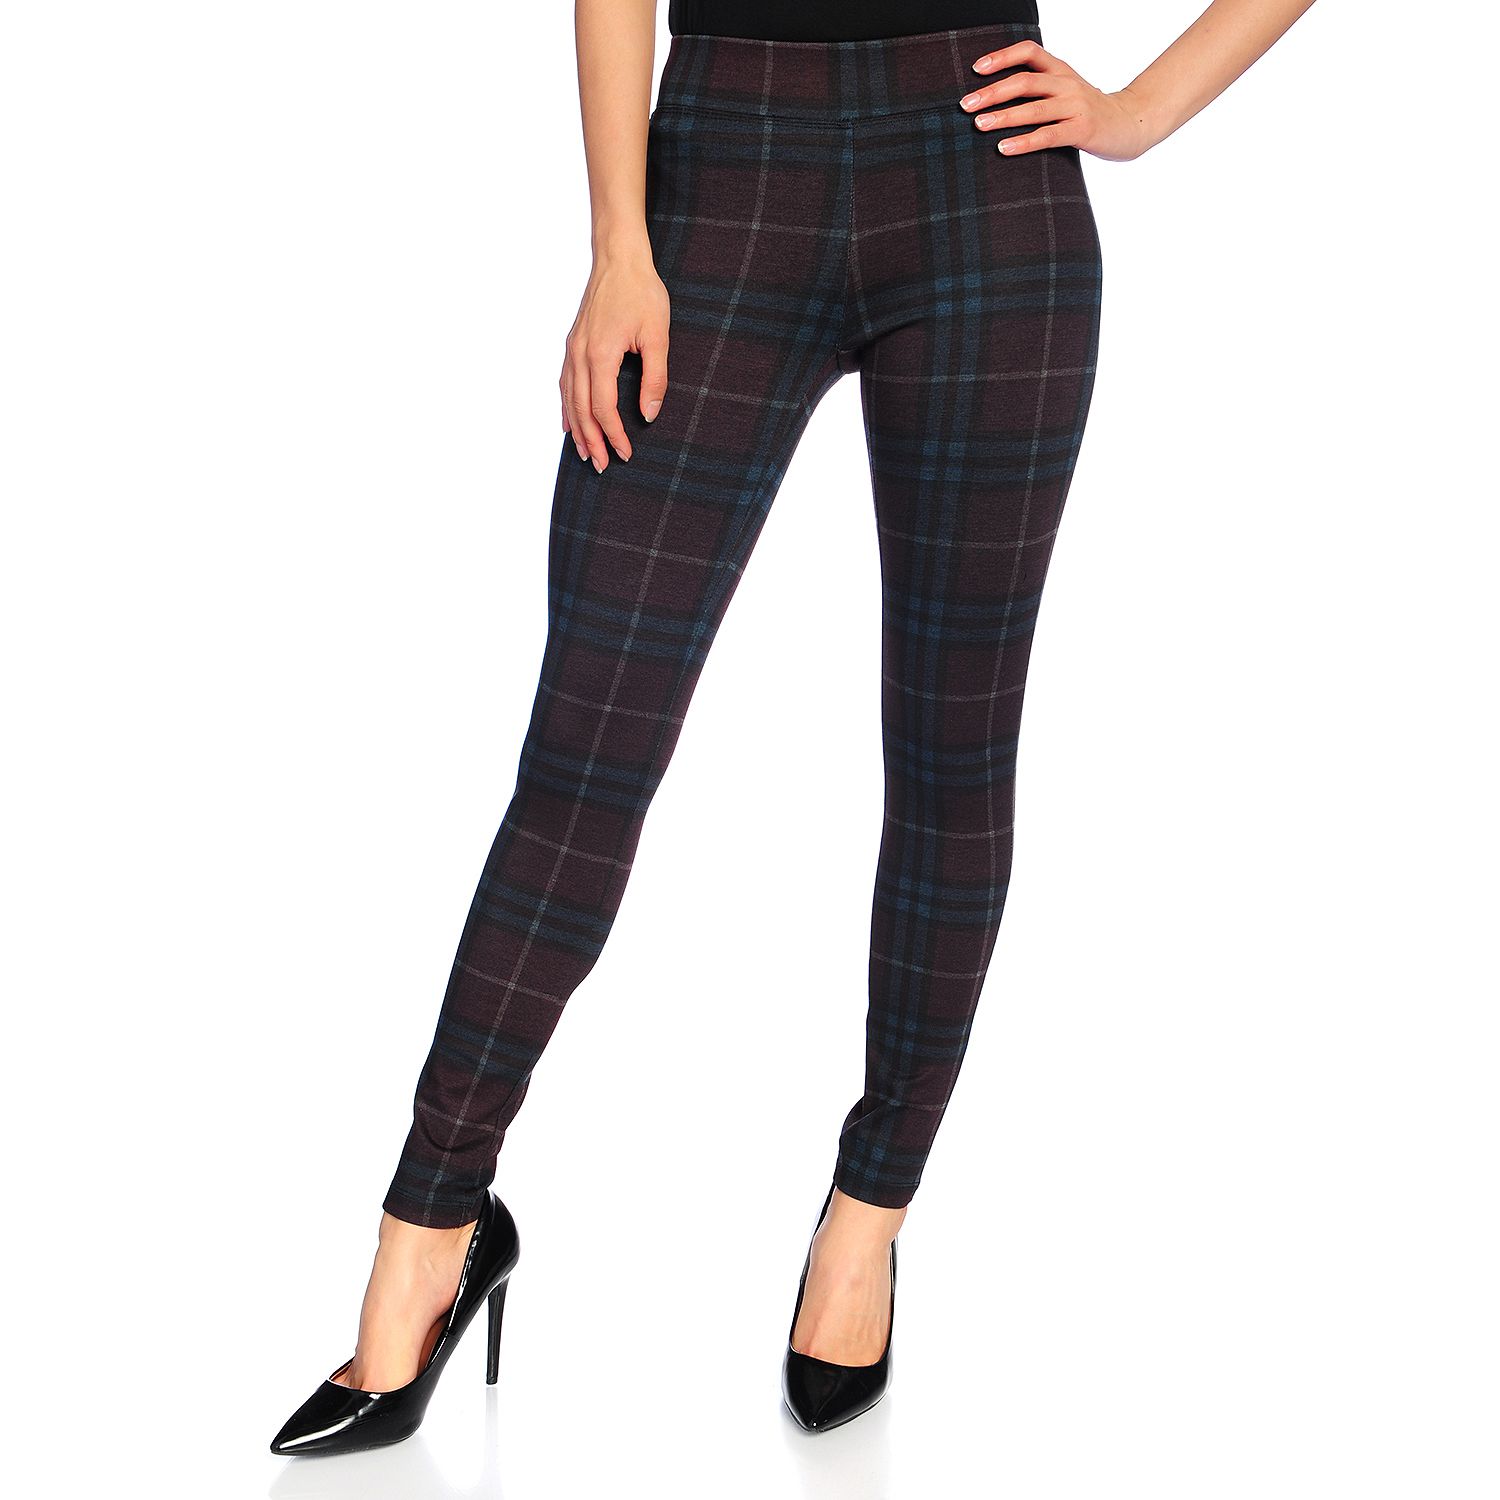 729-371- Slimming Options for Kate & Mallory® High Density Printed Knit Pull-on Leggings